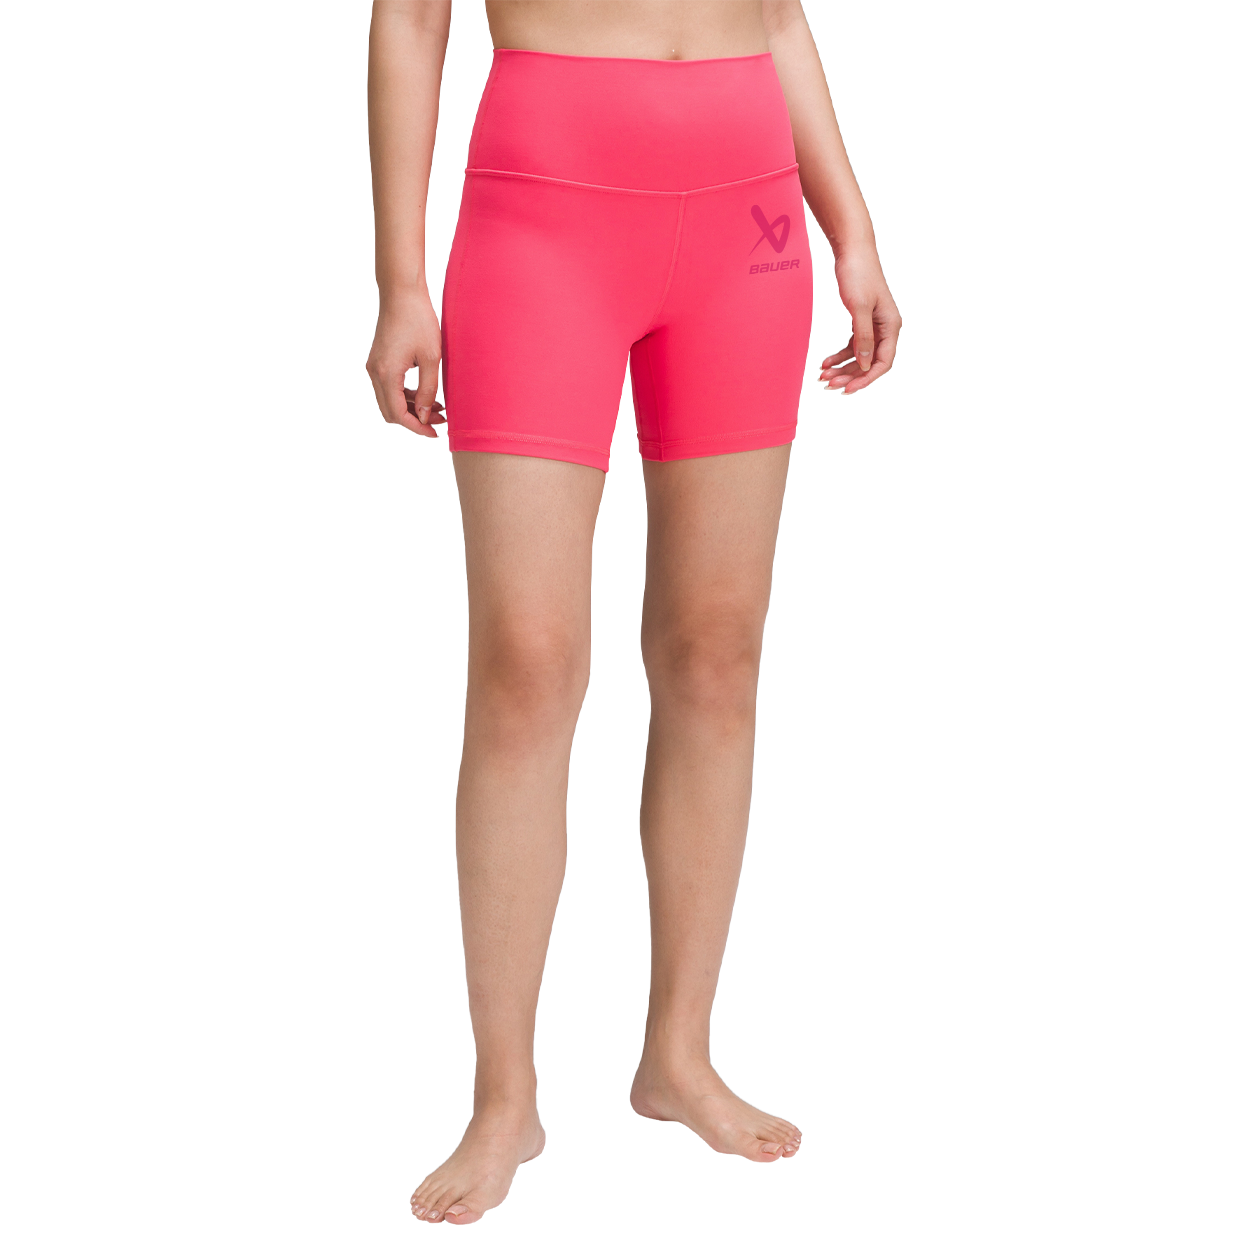 lululemon athletica Pink Accessories for Girls Sizes (4+)